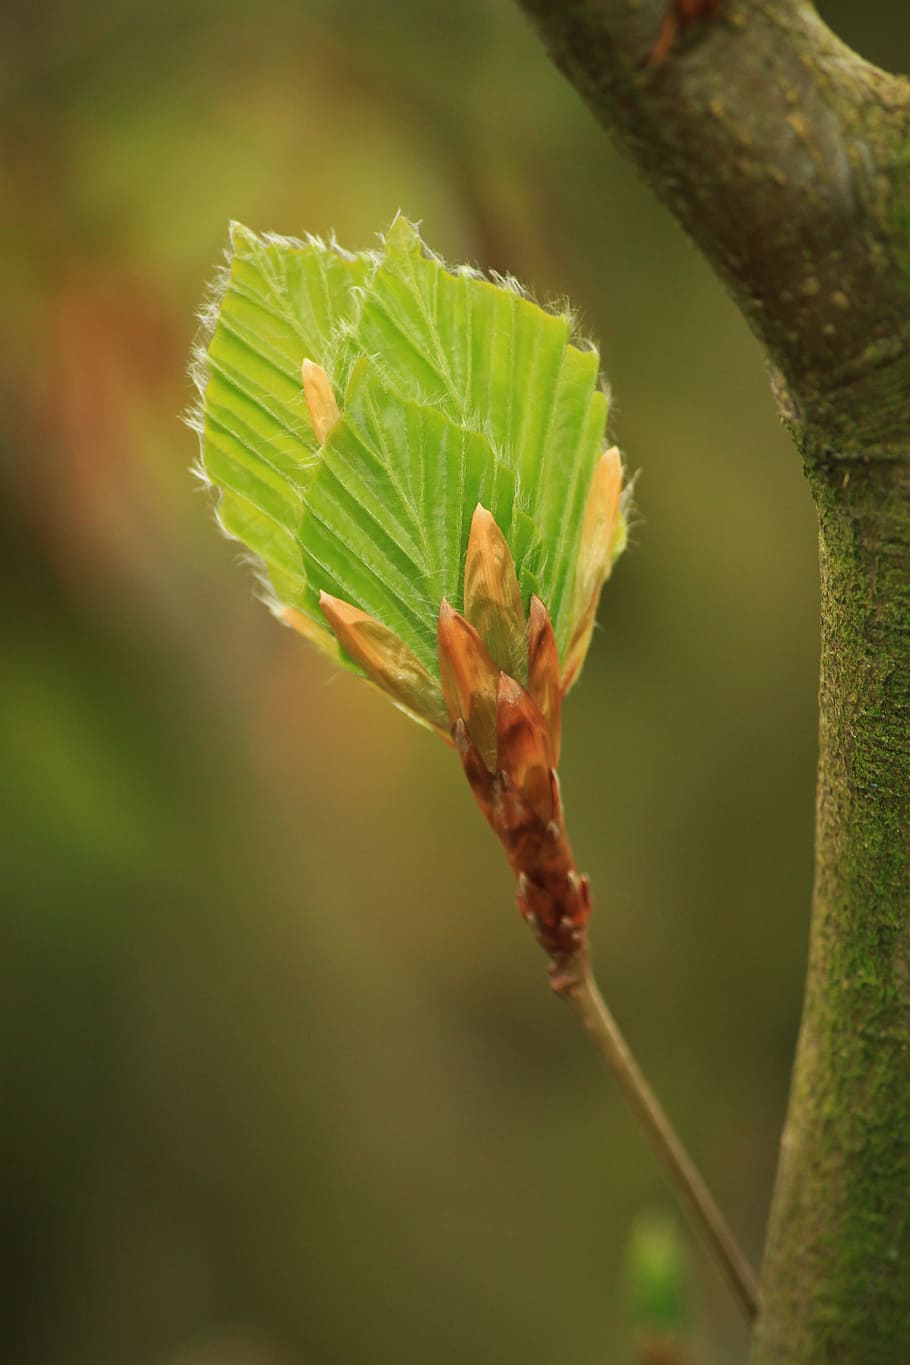 beech, beech leaf, beech leaves, leaves, nature, tree, plant, branch, growth, deciduous tree